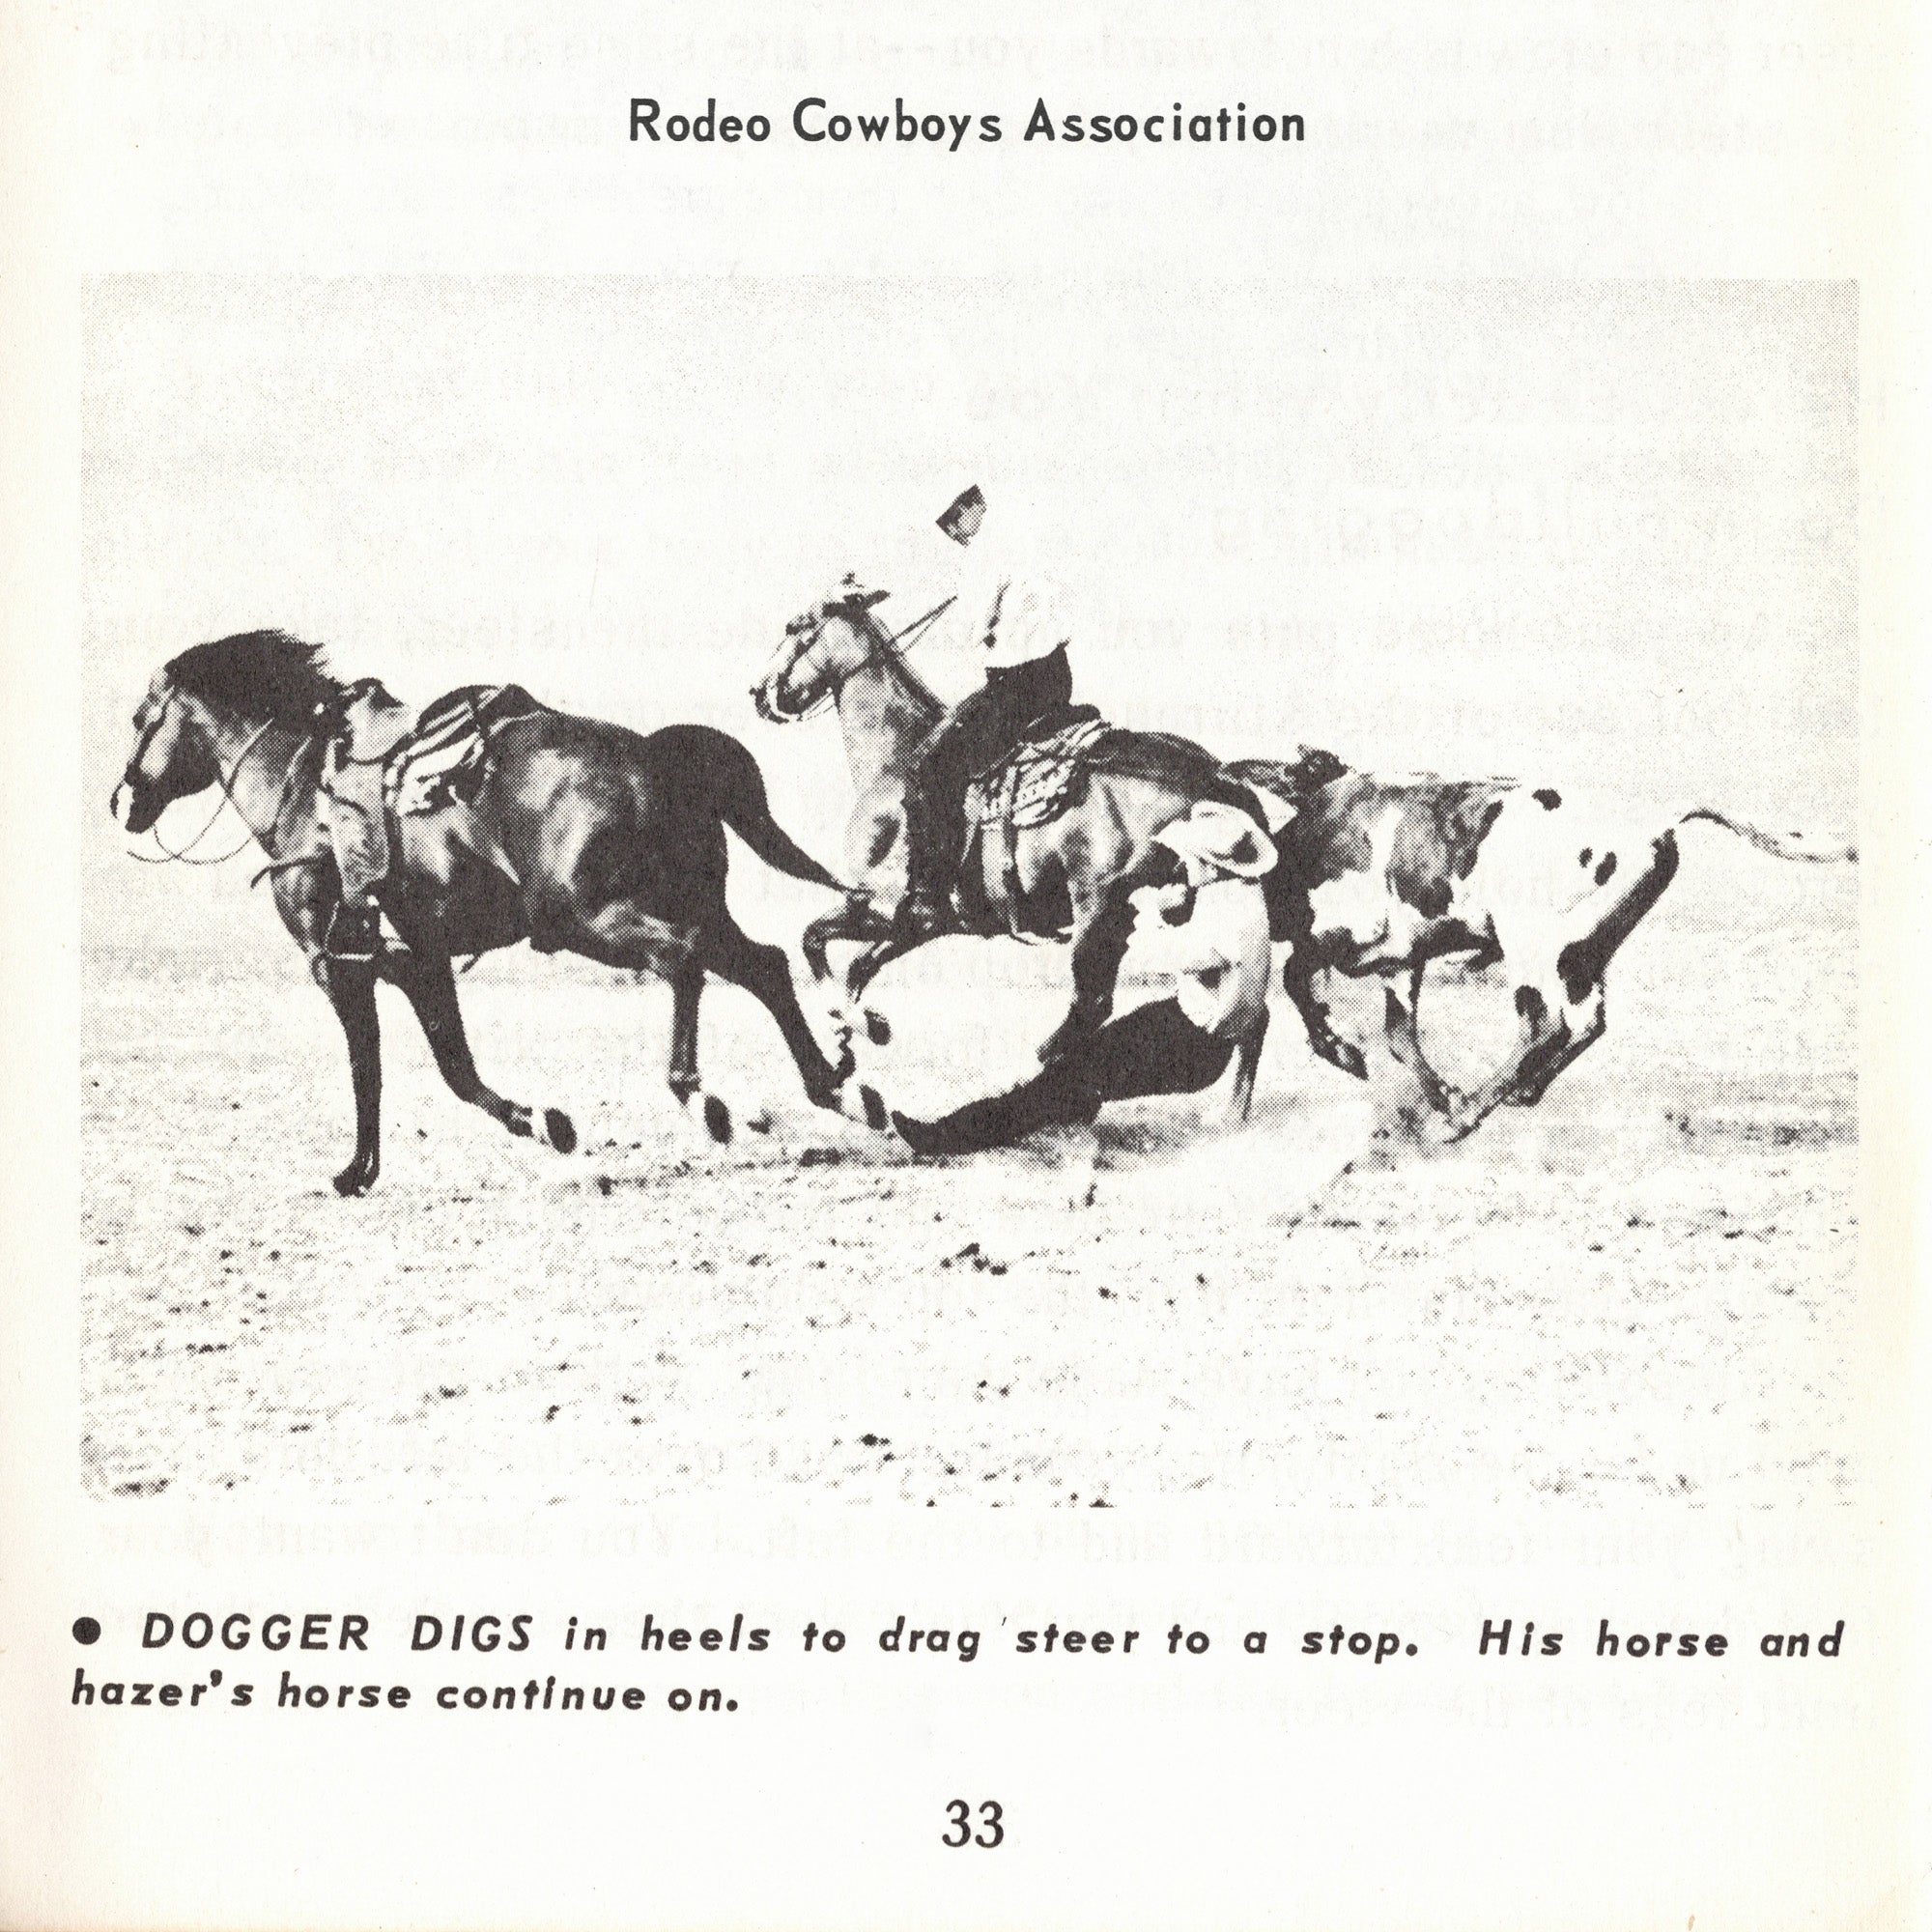 Rodeo Cowboys Association - How To Ride and Train the Western Horse